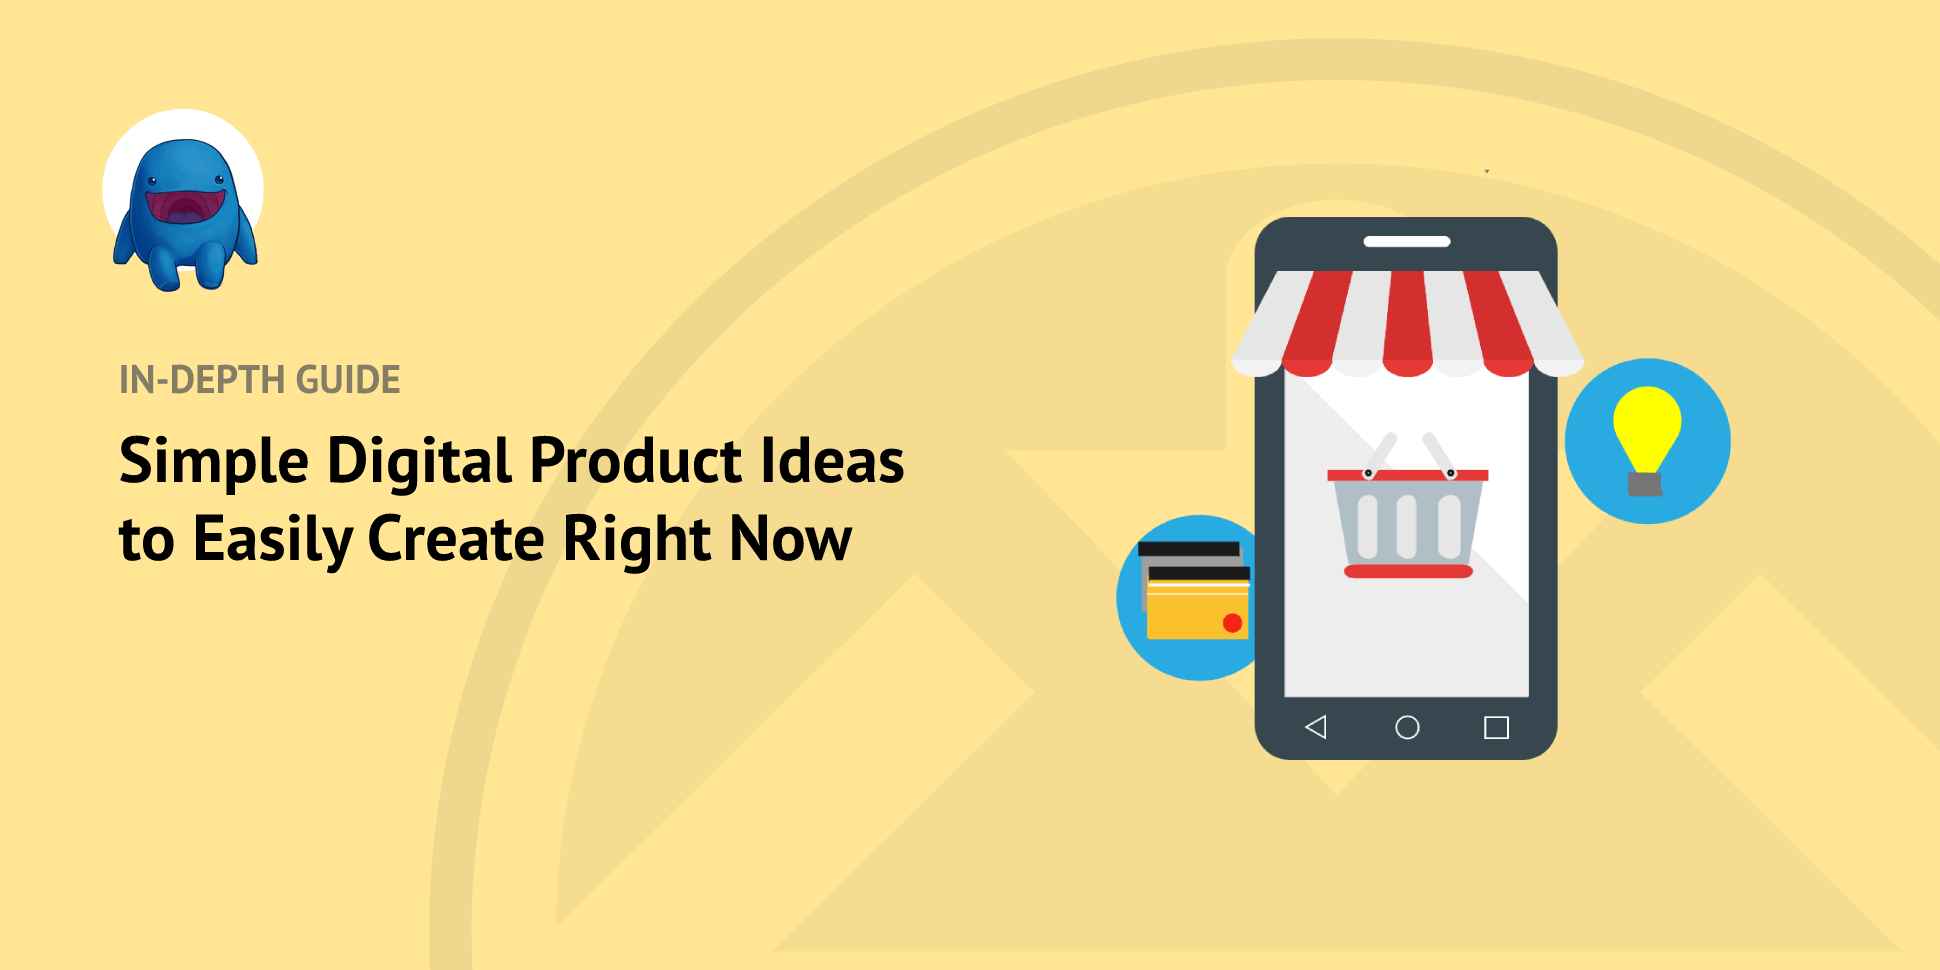 10 Simple Digital Product Ideas to Easily Create Right Now